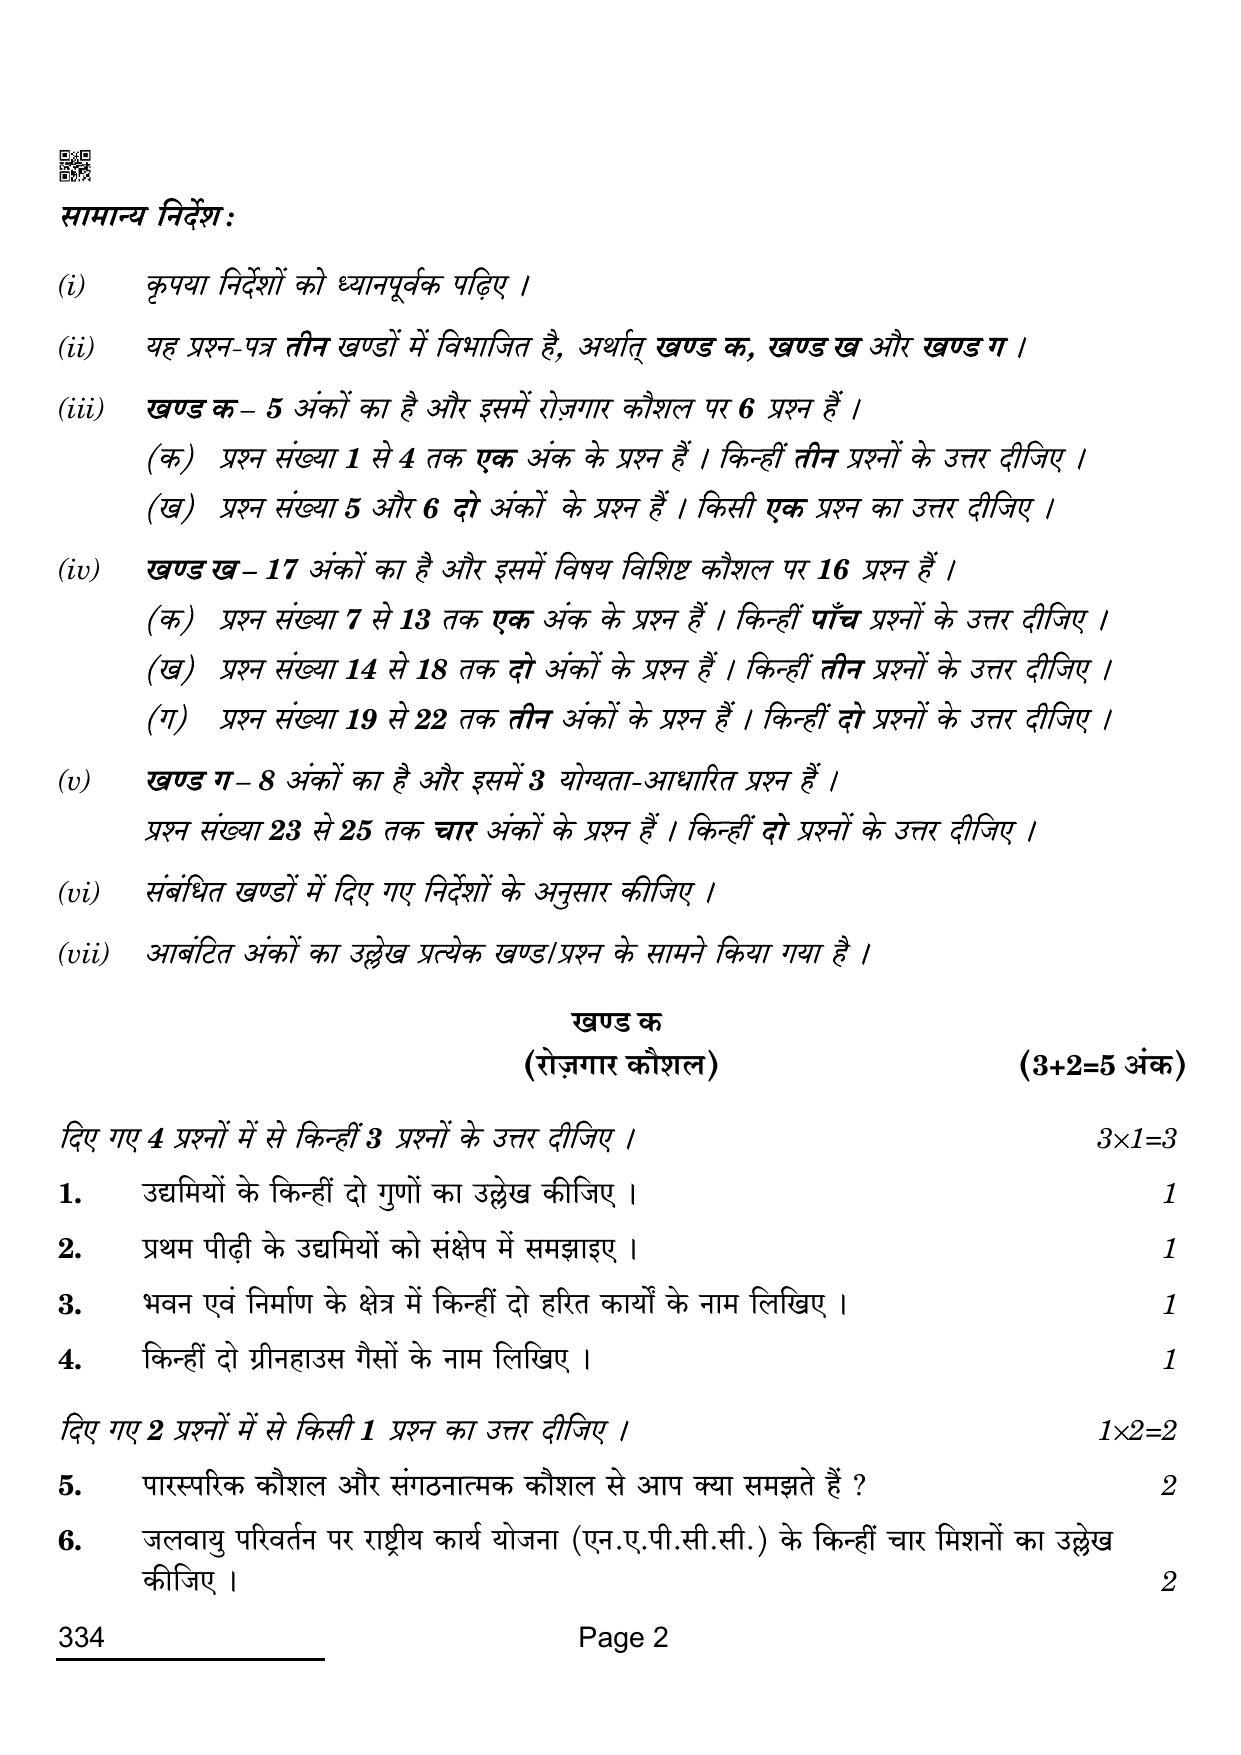 CBSE Class 12 334_Front Office Operations 2022 Question Paper - Page 2